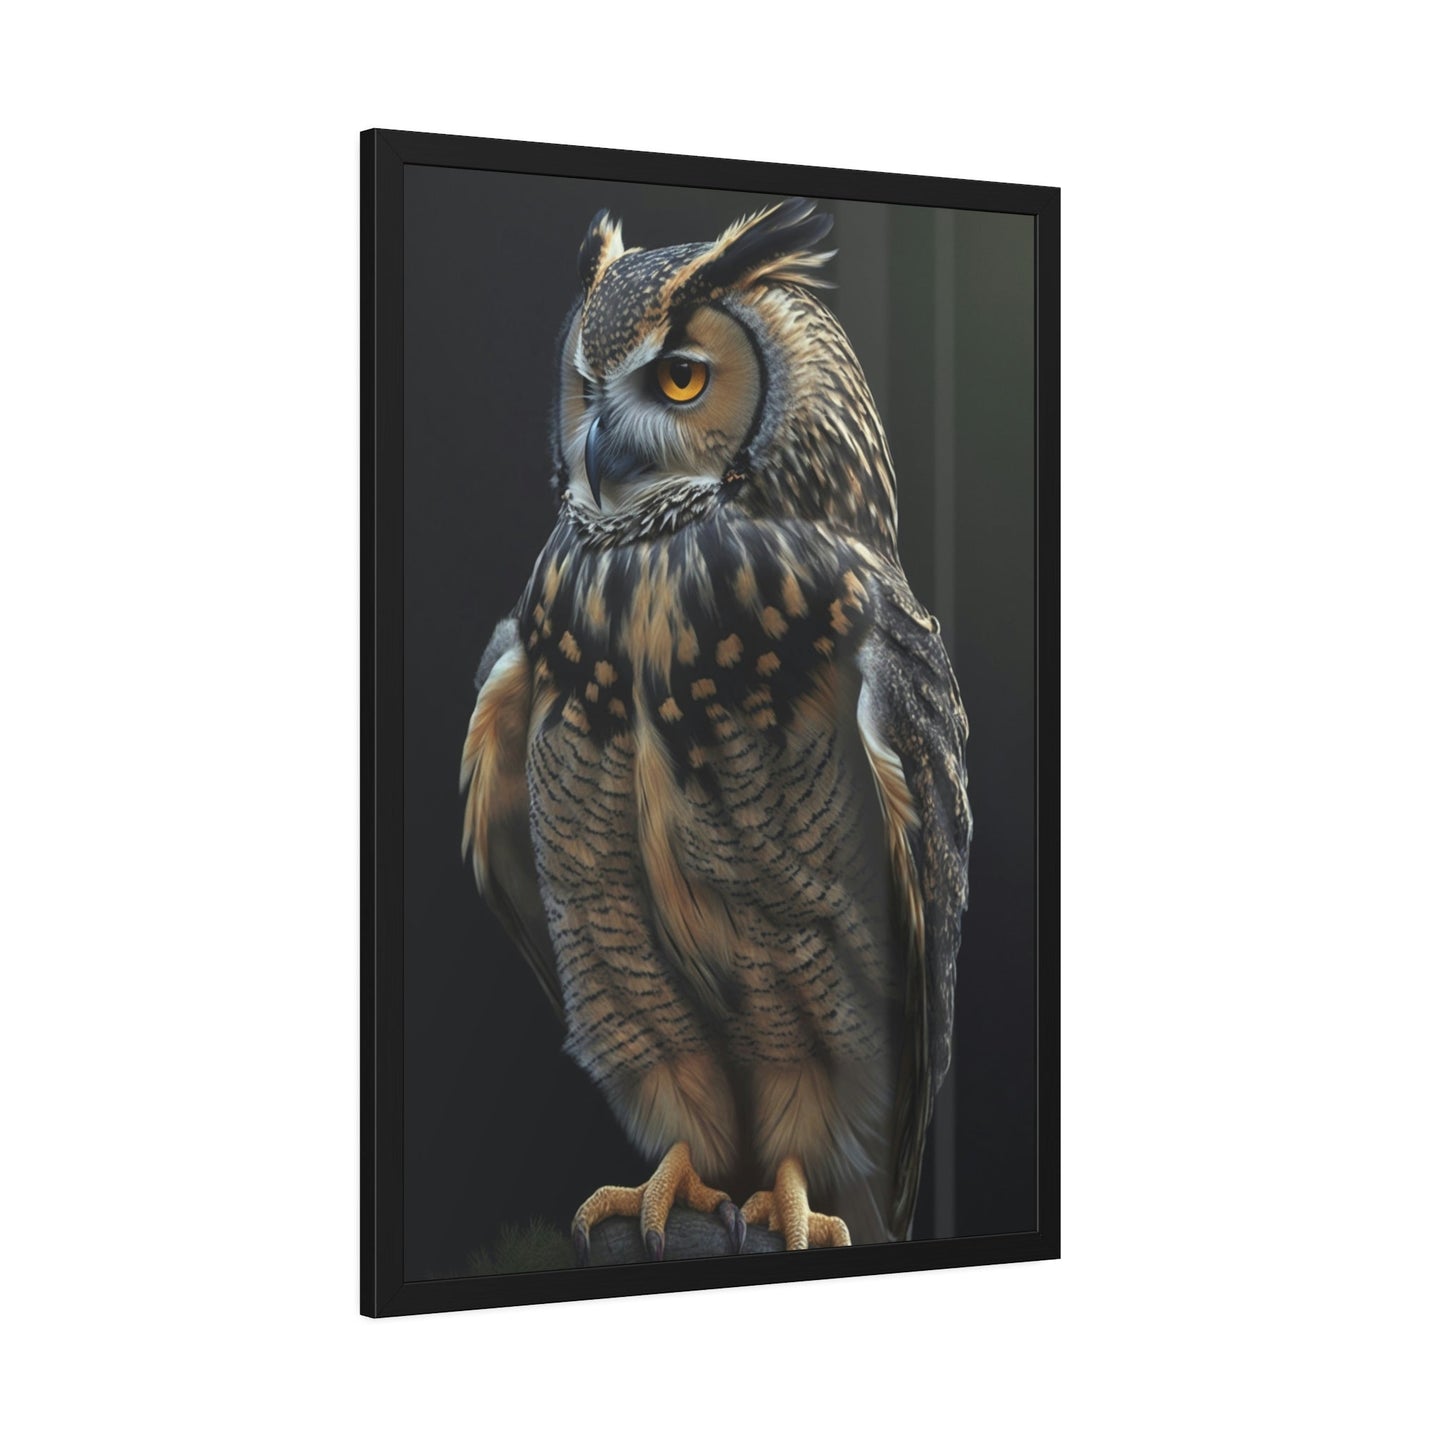 Majestic Hunter: An Artistic Depiction of an Owl on Canvas